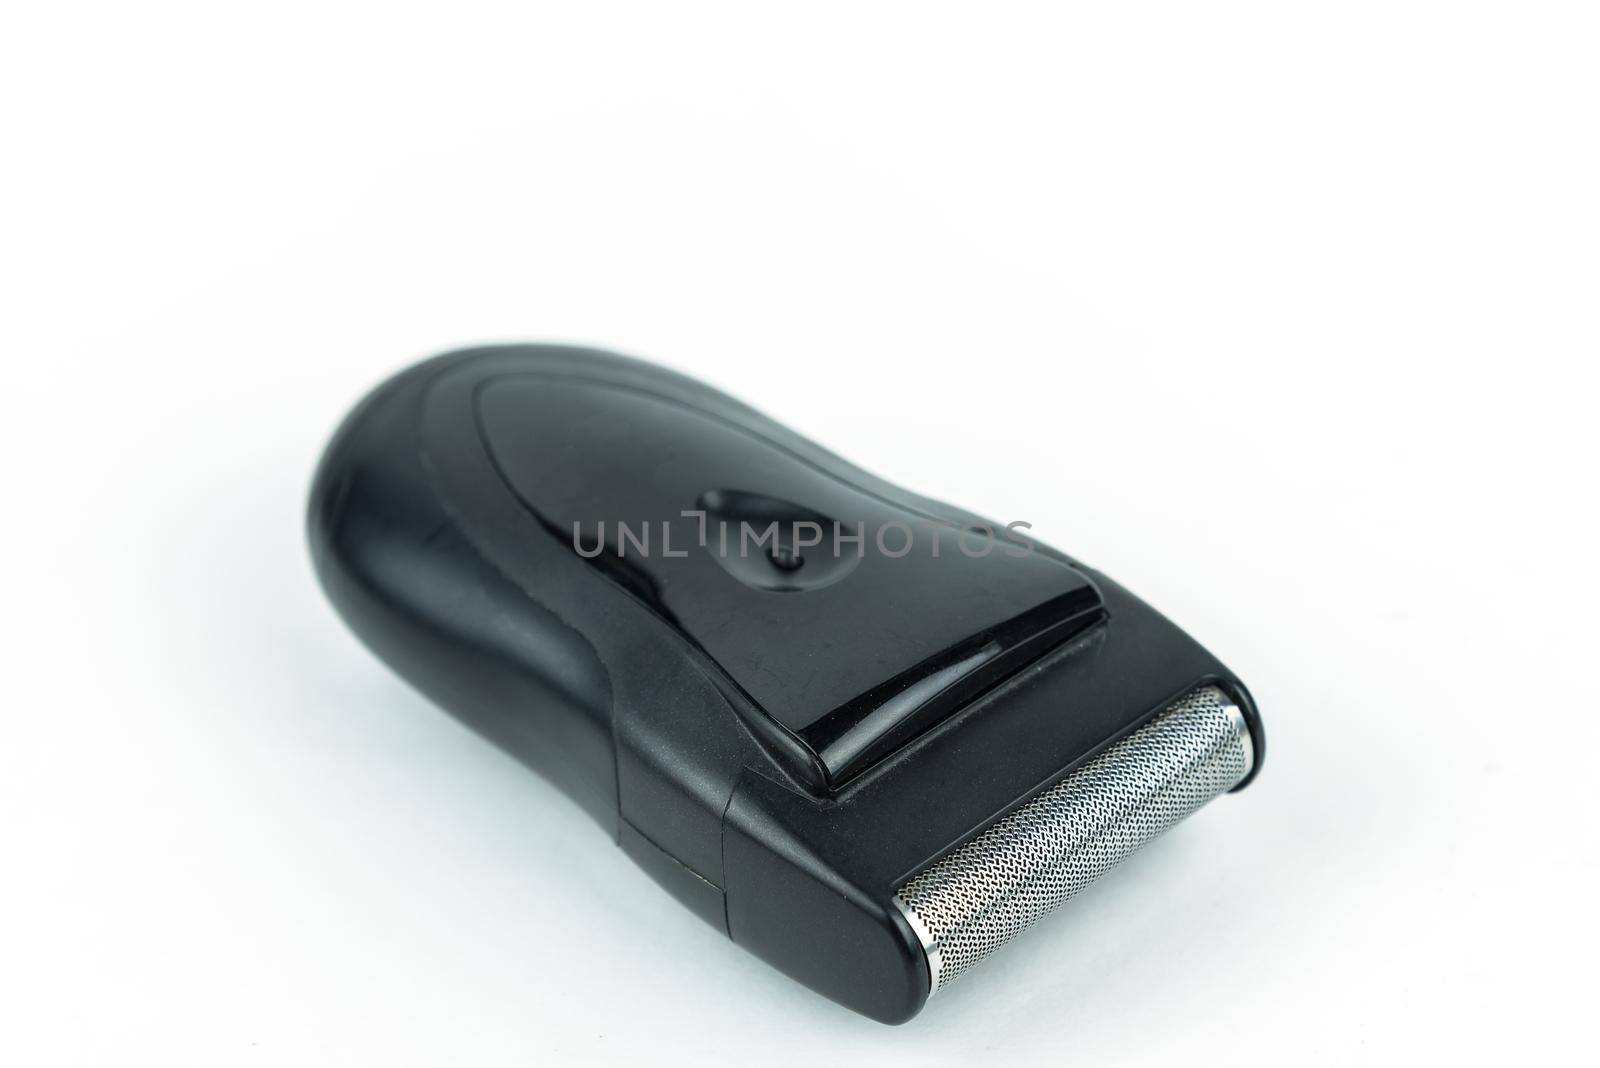 Electric shaver over white background by Wmpix